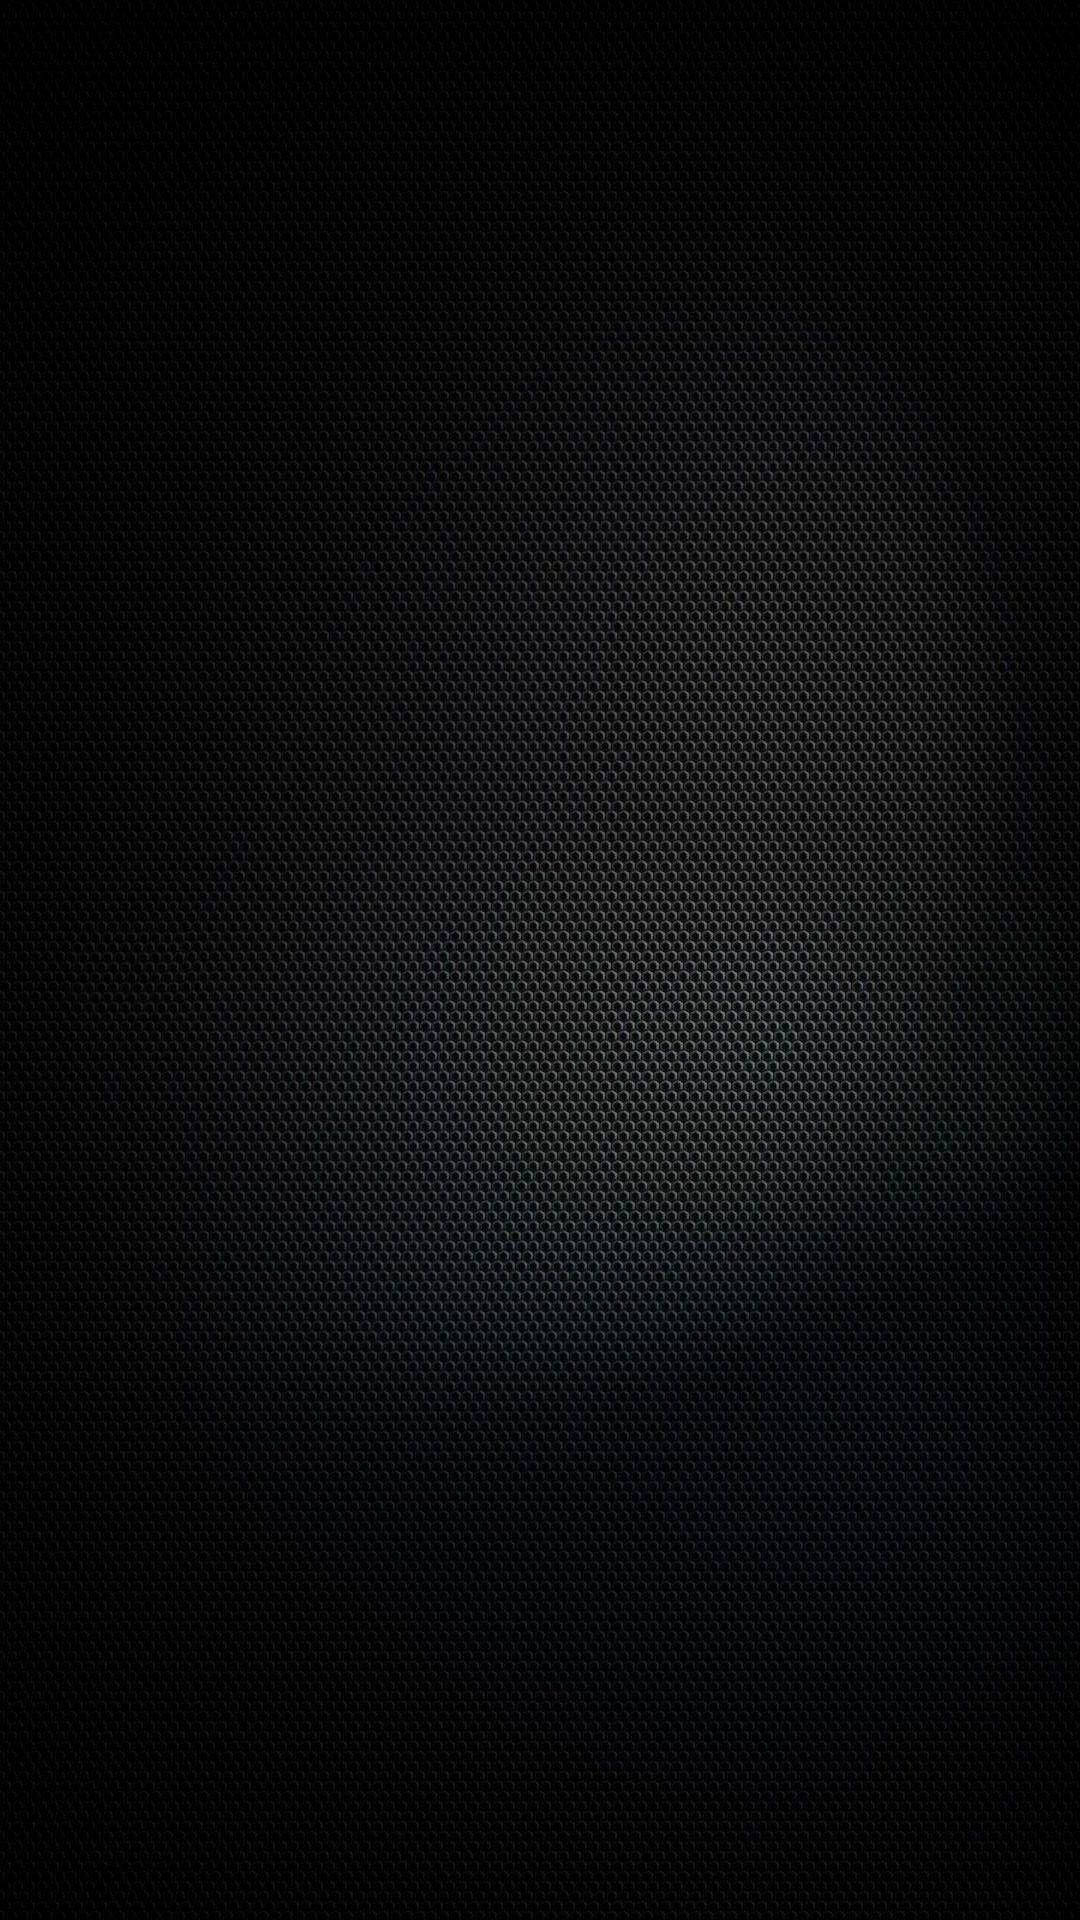 Pure Black With White Gradient Wallpaper